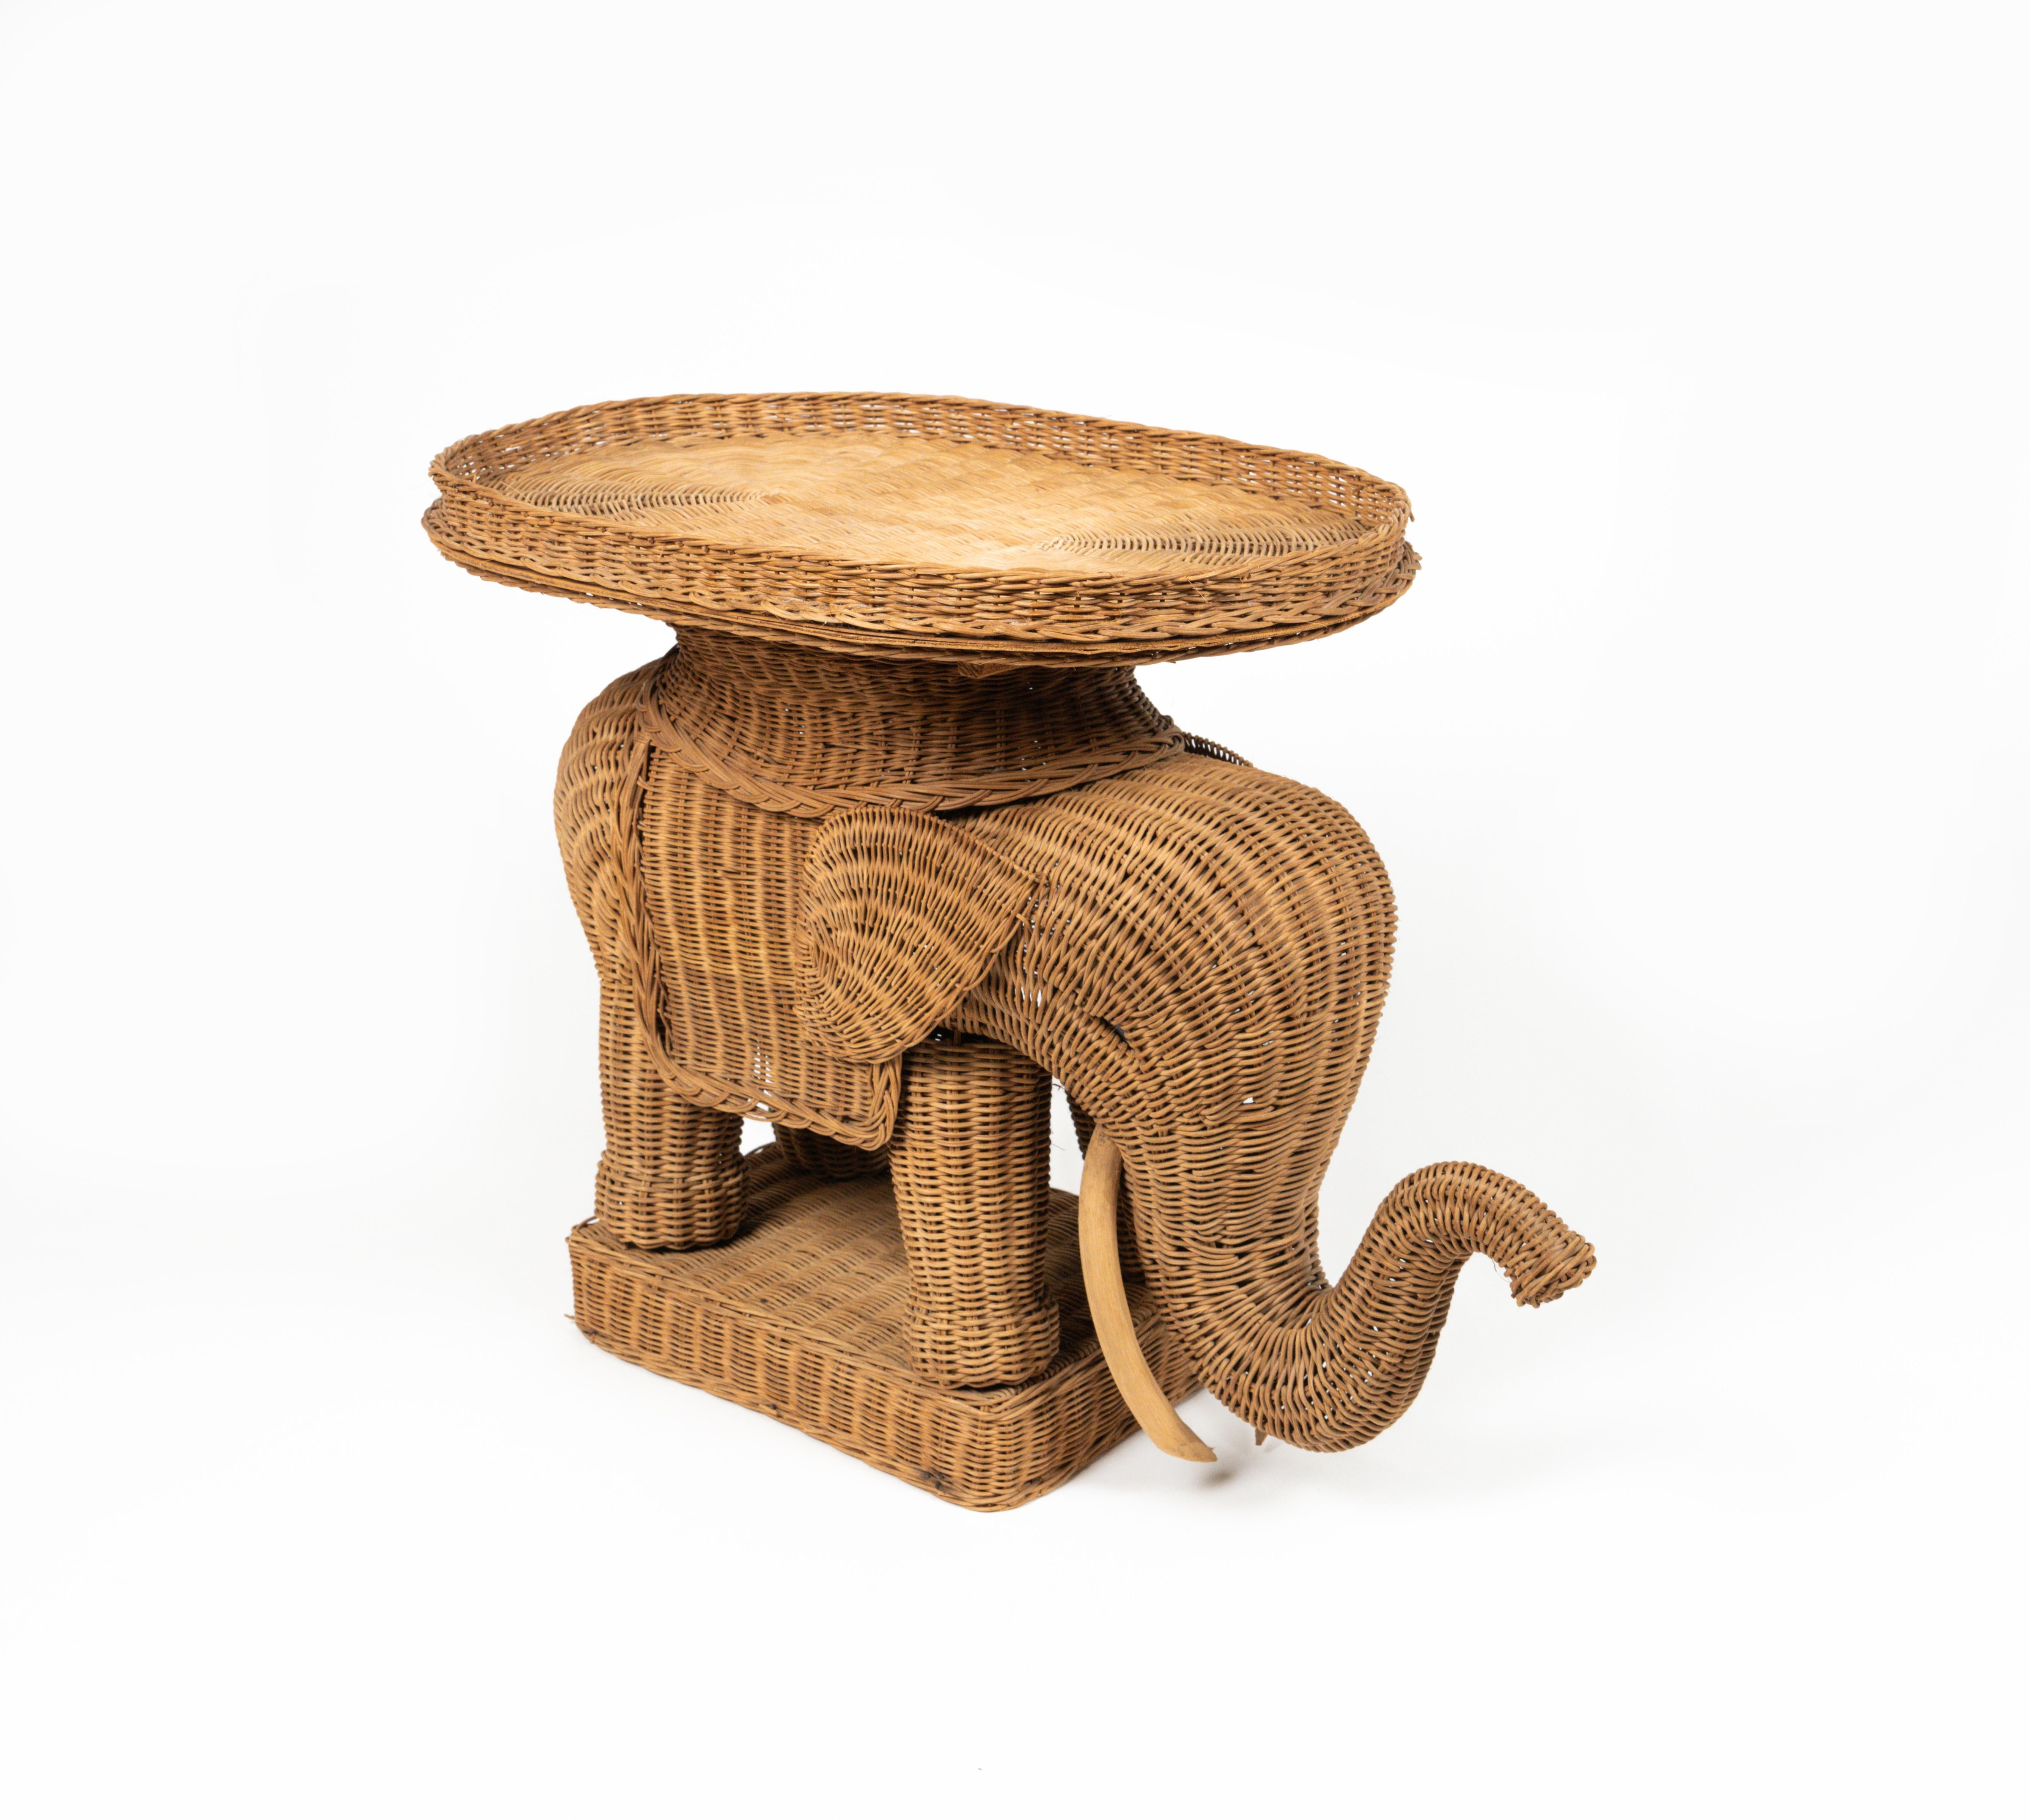 Mid-Century Modern Rattan & Wicker Elephant Side Coffee Table Vivai Del Sud Style, Italy, 1960s For Sale